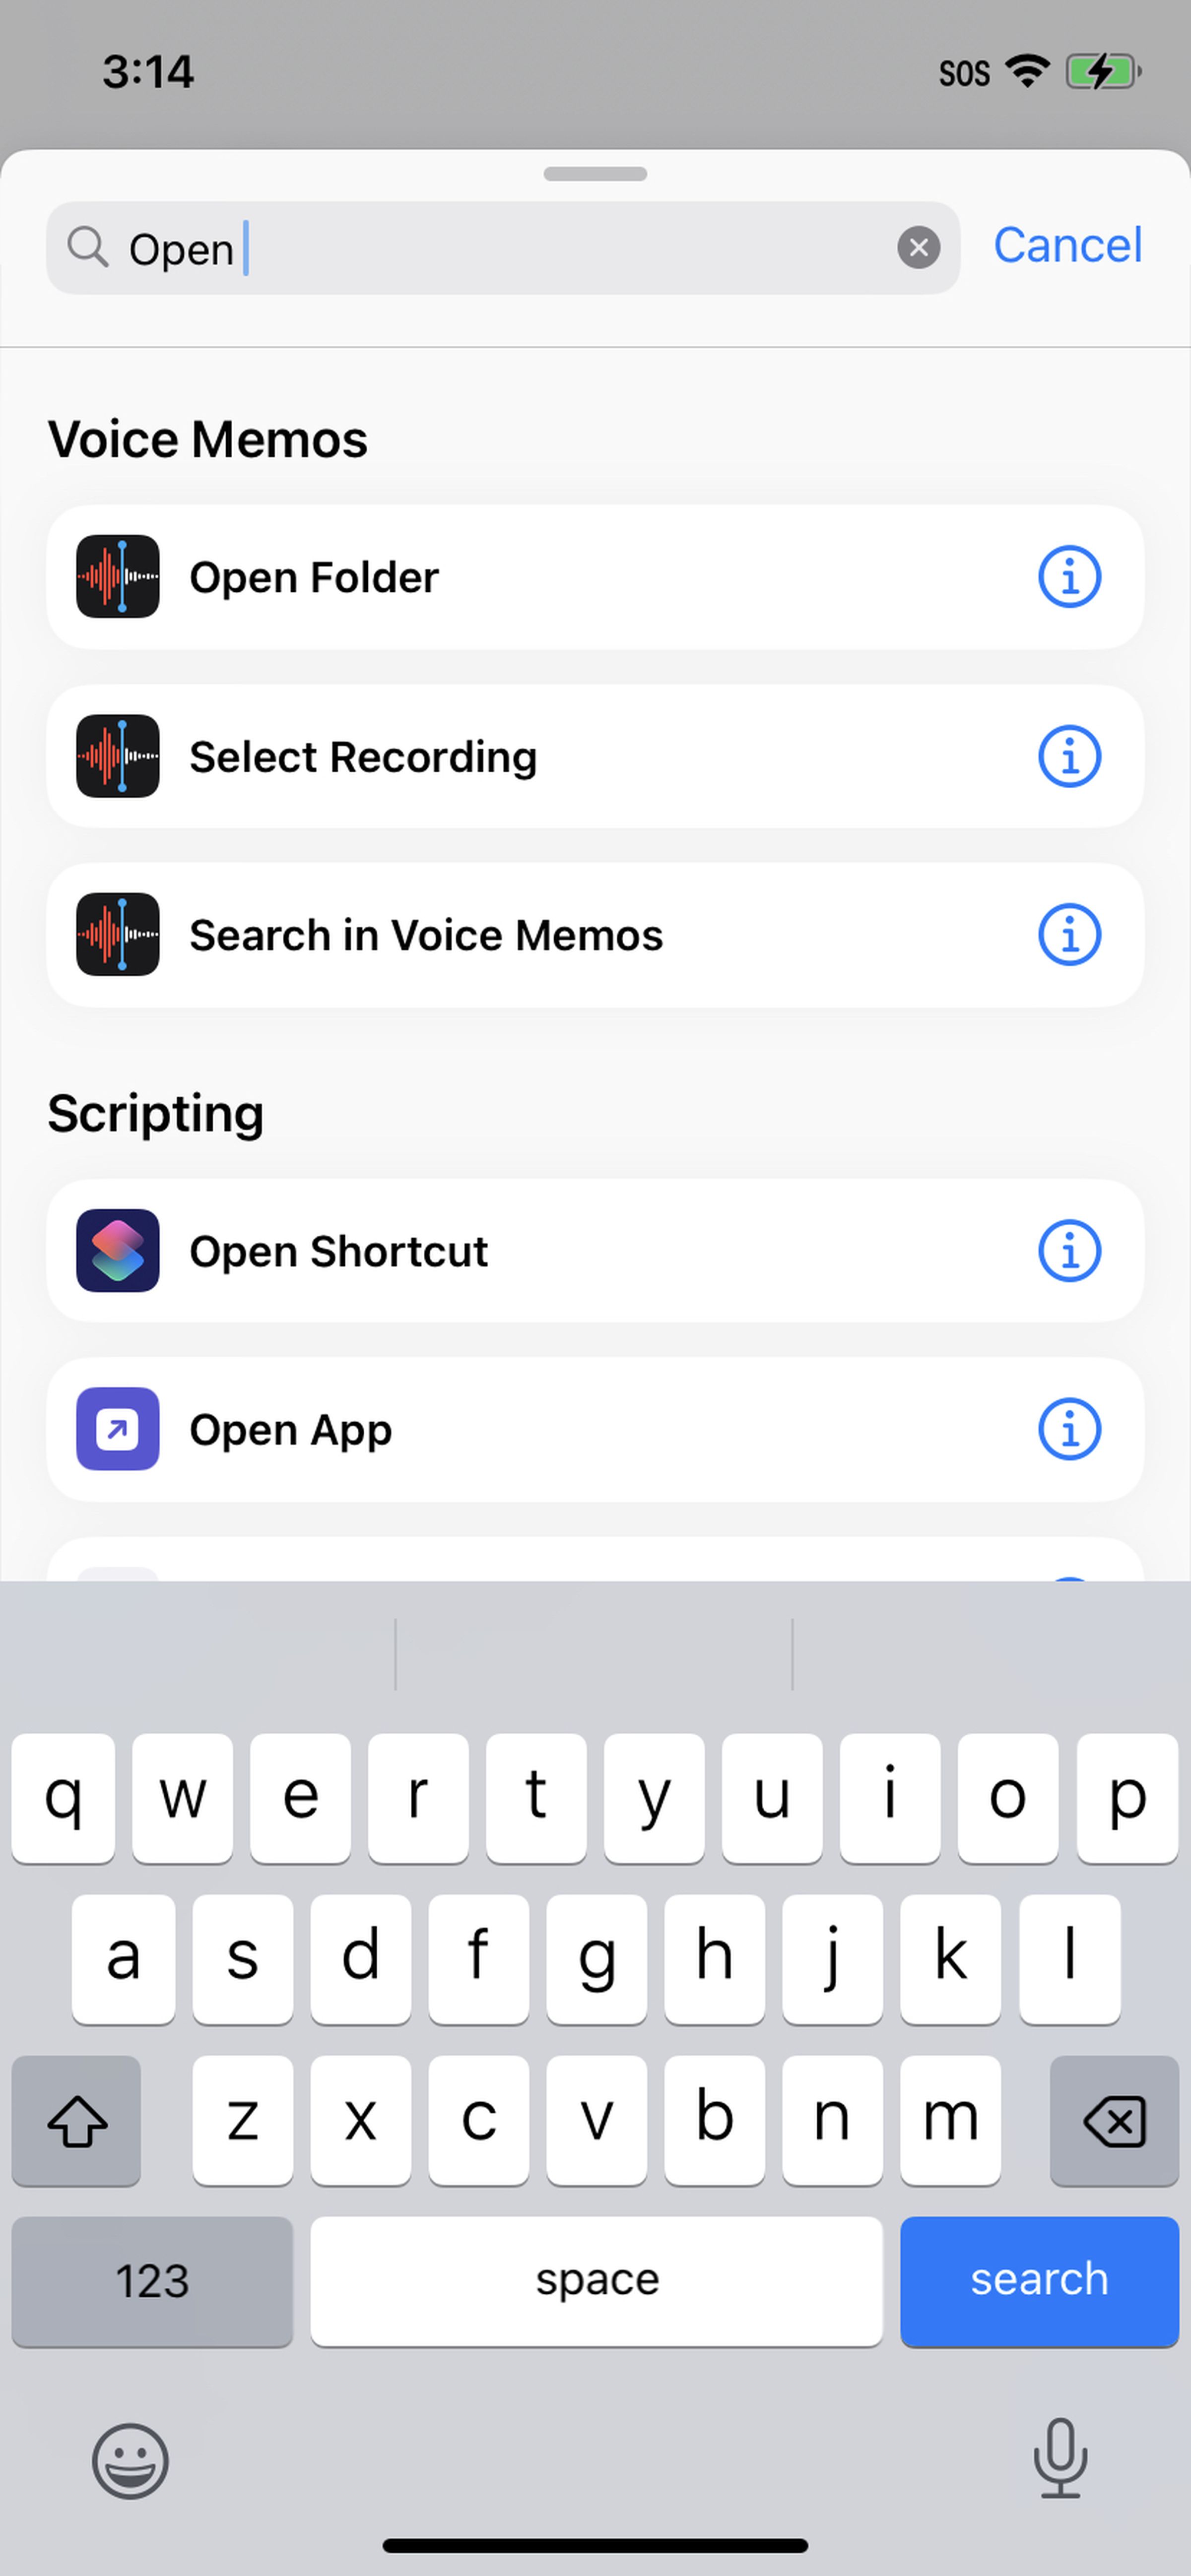 Typing “Open” in the top search page, with scripting and voice memo actions appearing.